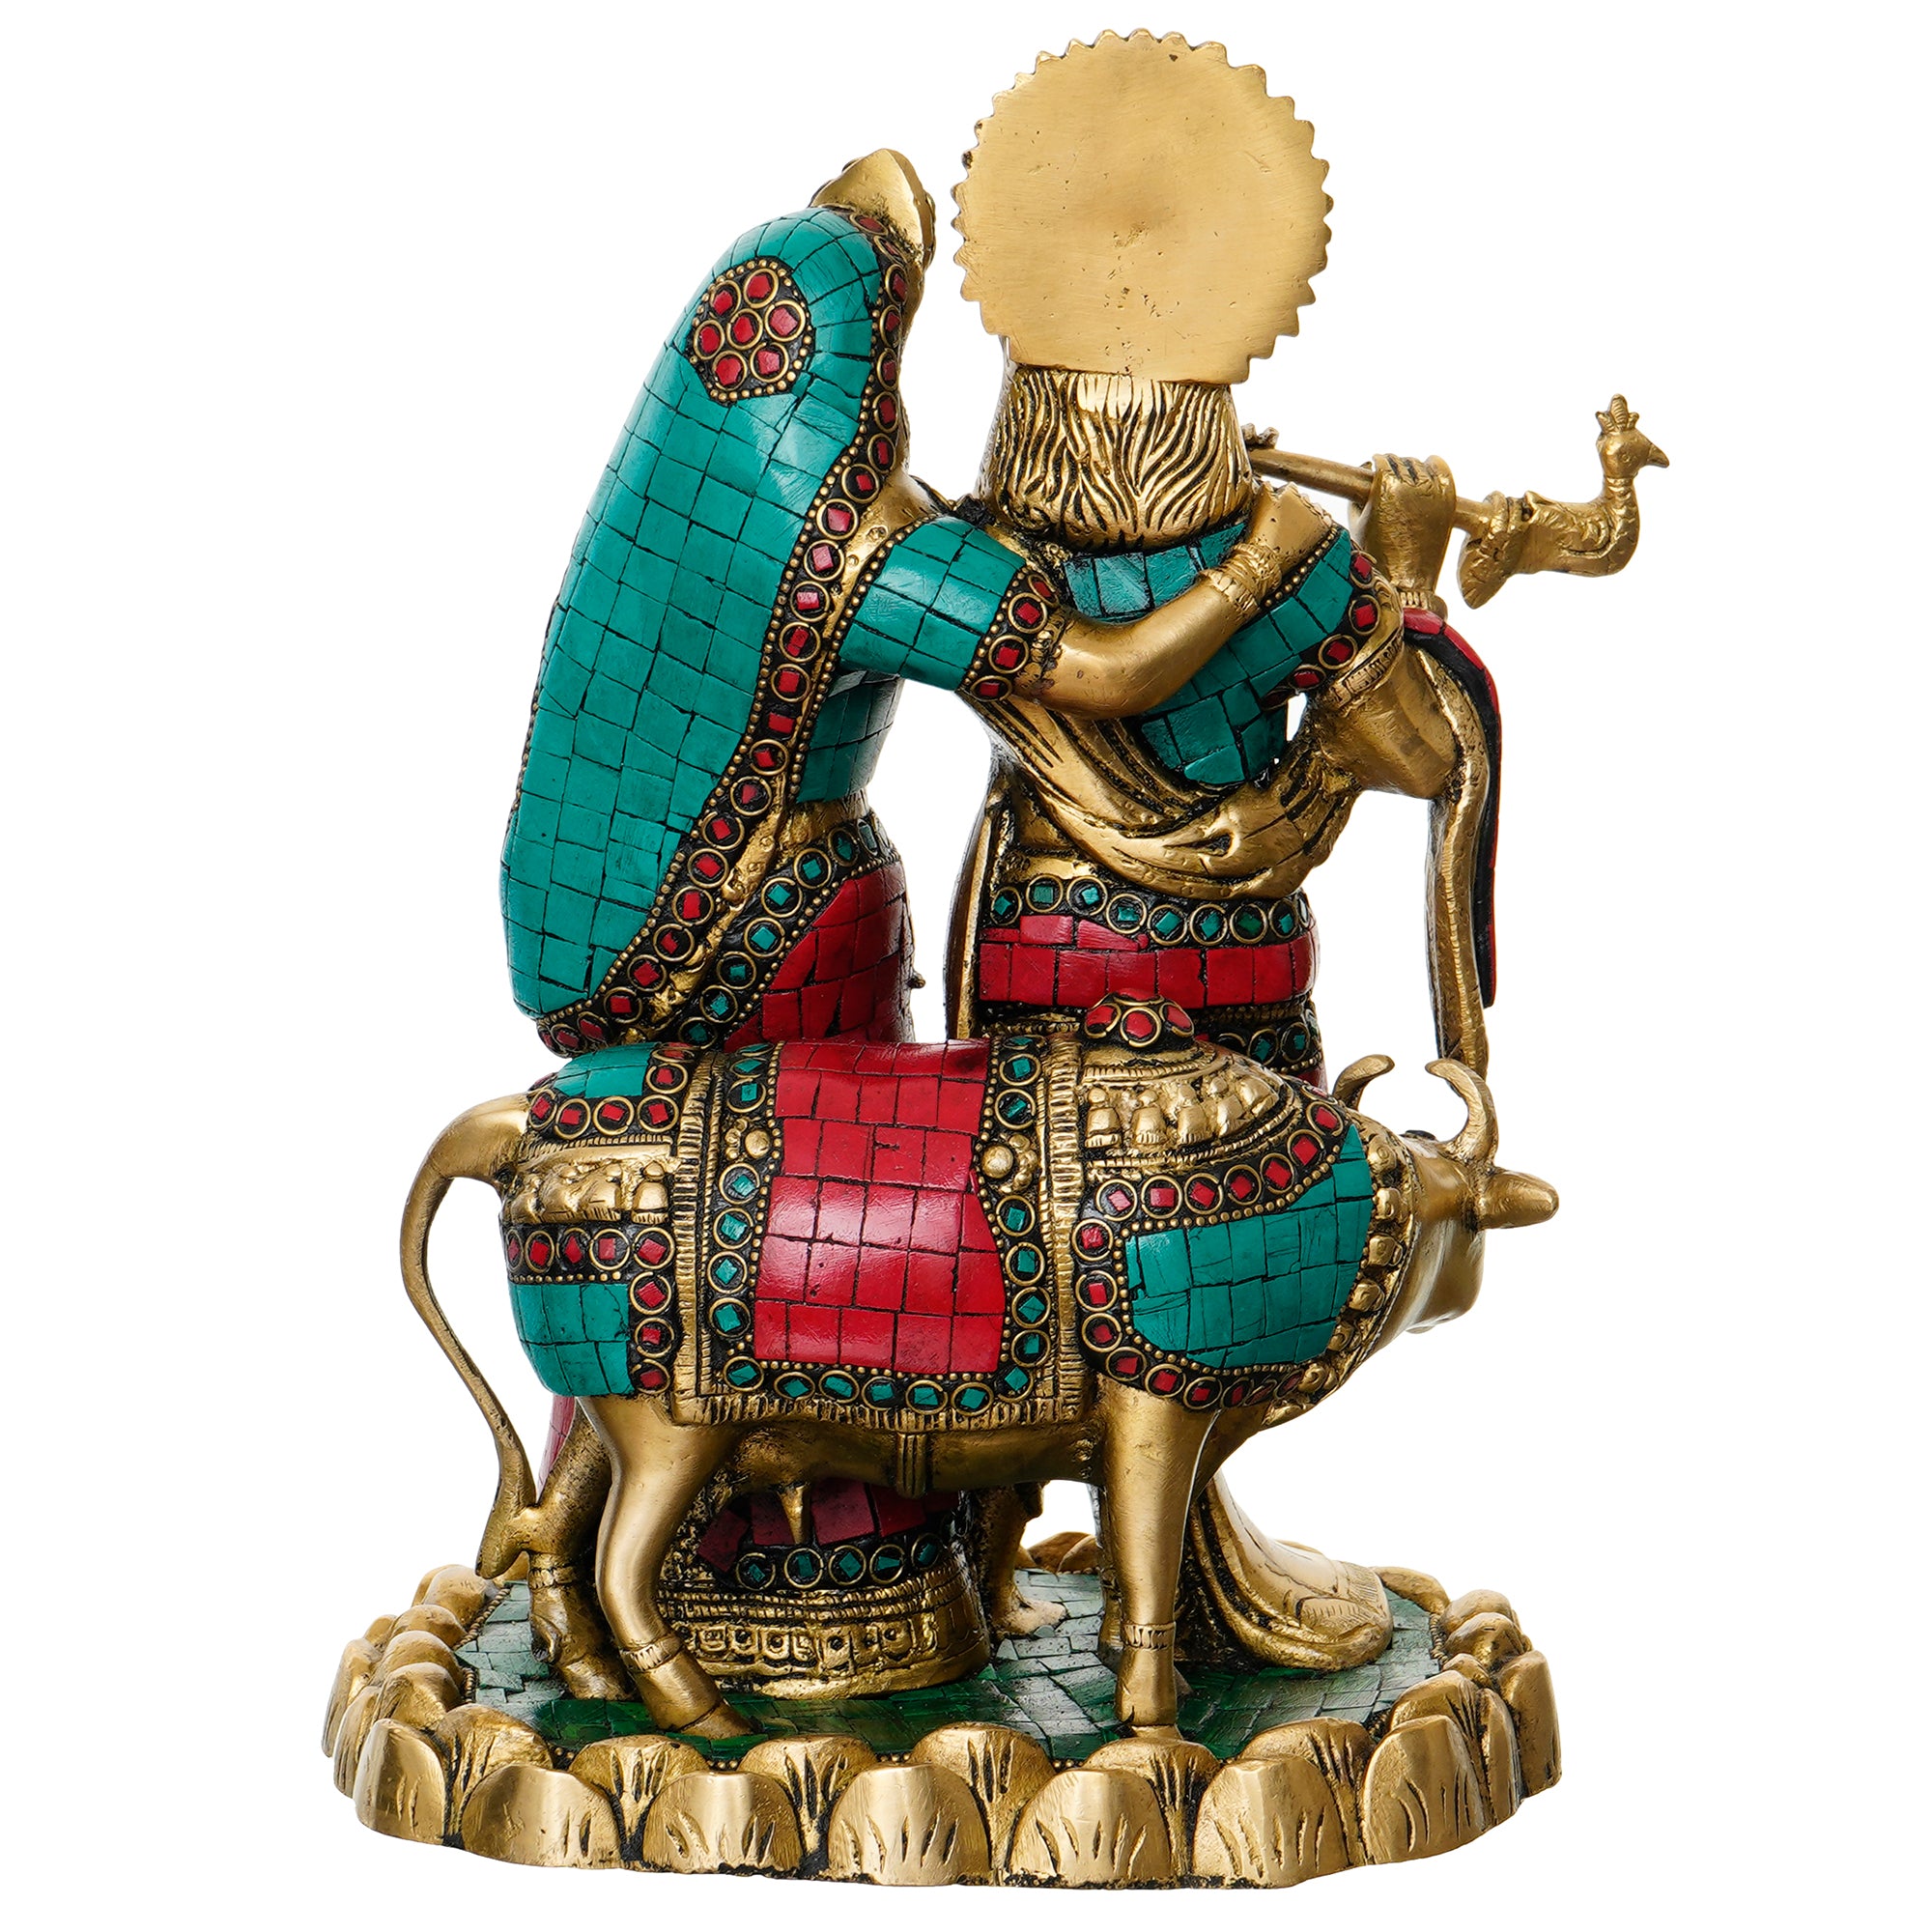 Colorful Stone Work Brass Radha Krishna Statue with Cow Figurine (Gold, Green, Red) 6